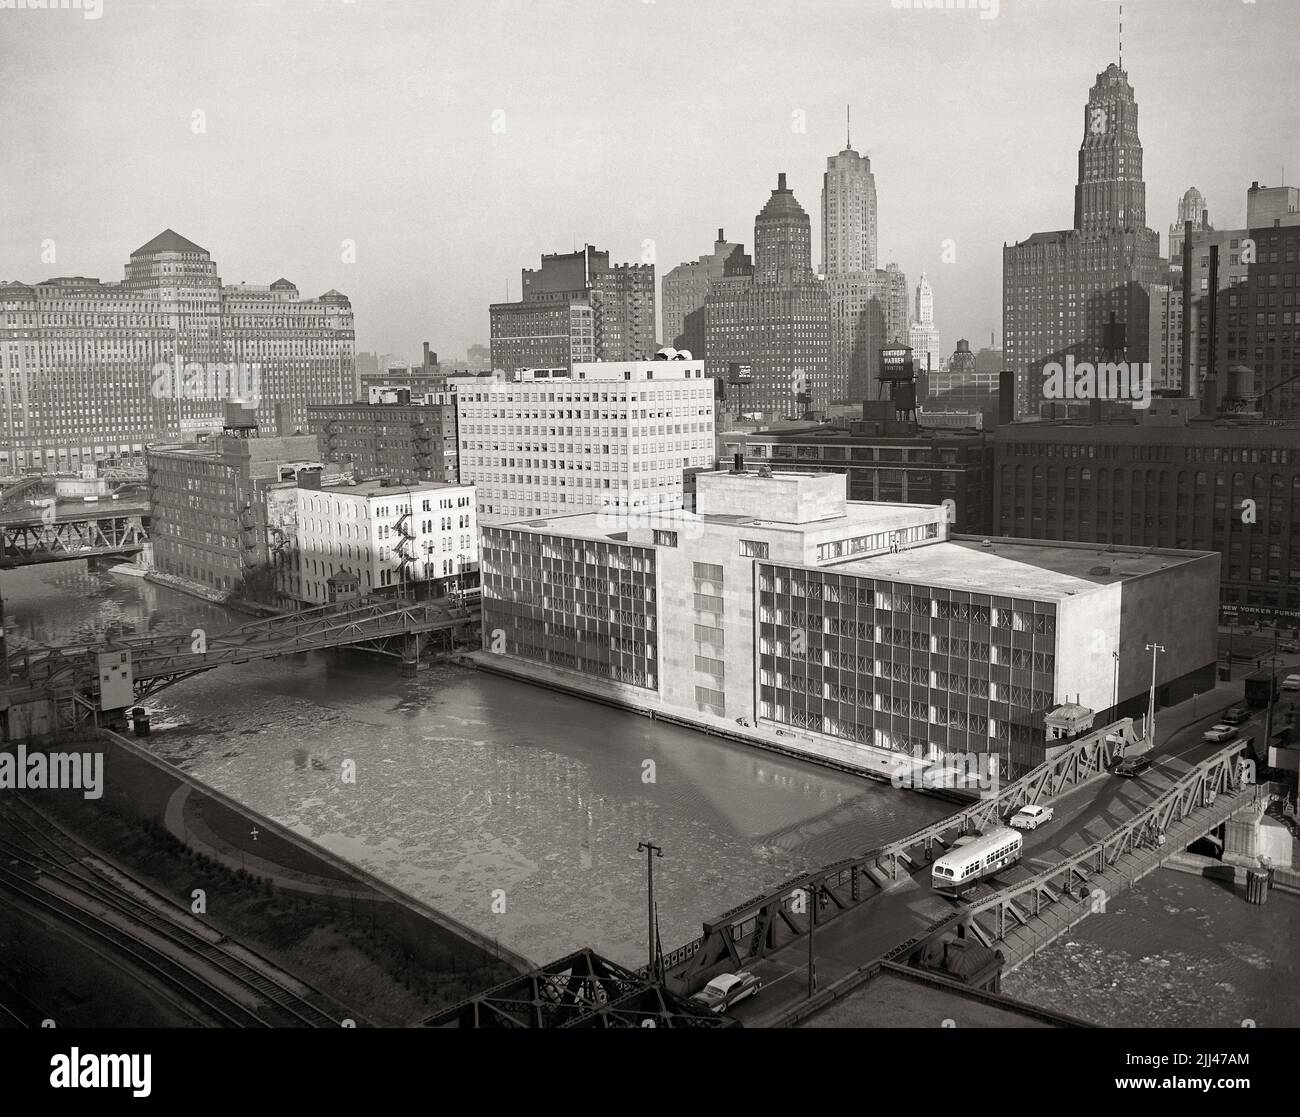 View of the newly constructed Morton Salt Headquarters Building along the  Chicago River, December 13, 1957. Image from 4x5 inch negative. Stock Photo